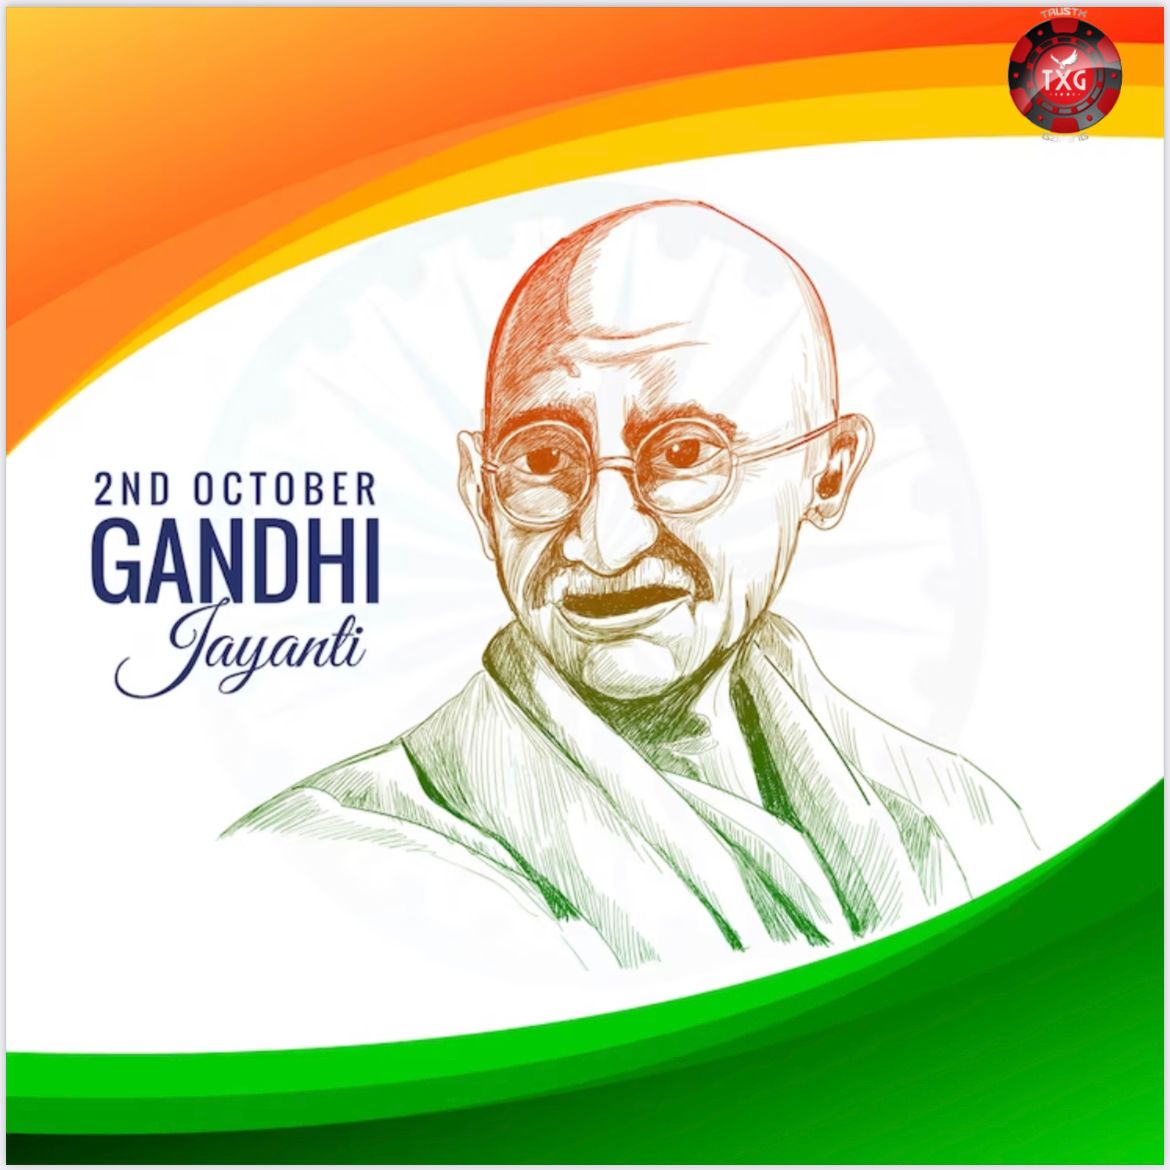 🎉 On this special day of Gandhi Jayanti, we remember the Father of the Nation and his invaluable contributions to India's freedom struggle. 

Let's honor his legacy by promoting peace and unity. 
🕊️🇮🇳 trustxgaming.io. 

#GandhiJayanti 
#MahatmaGandhi #PeaceAndUnity